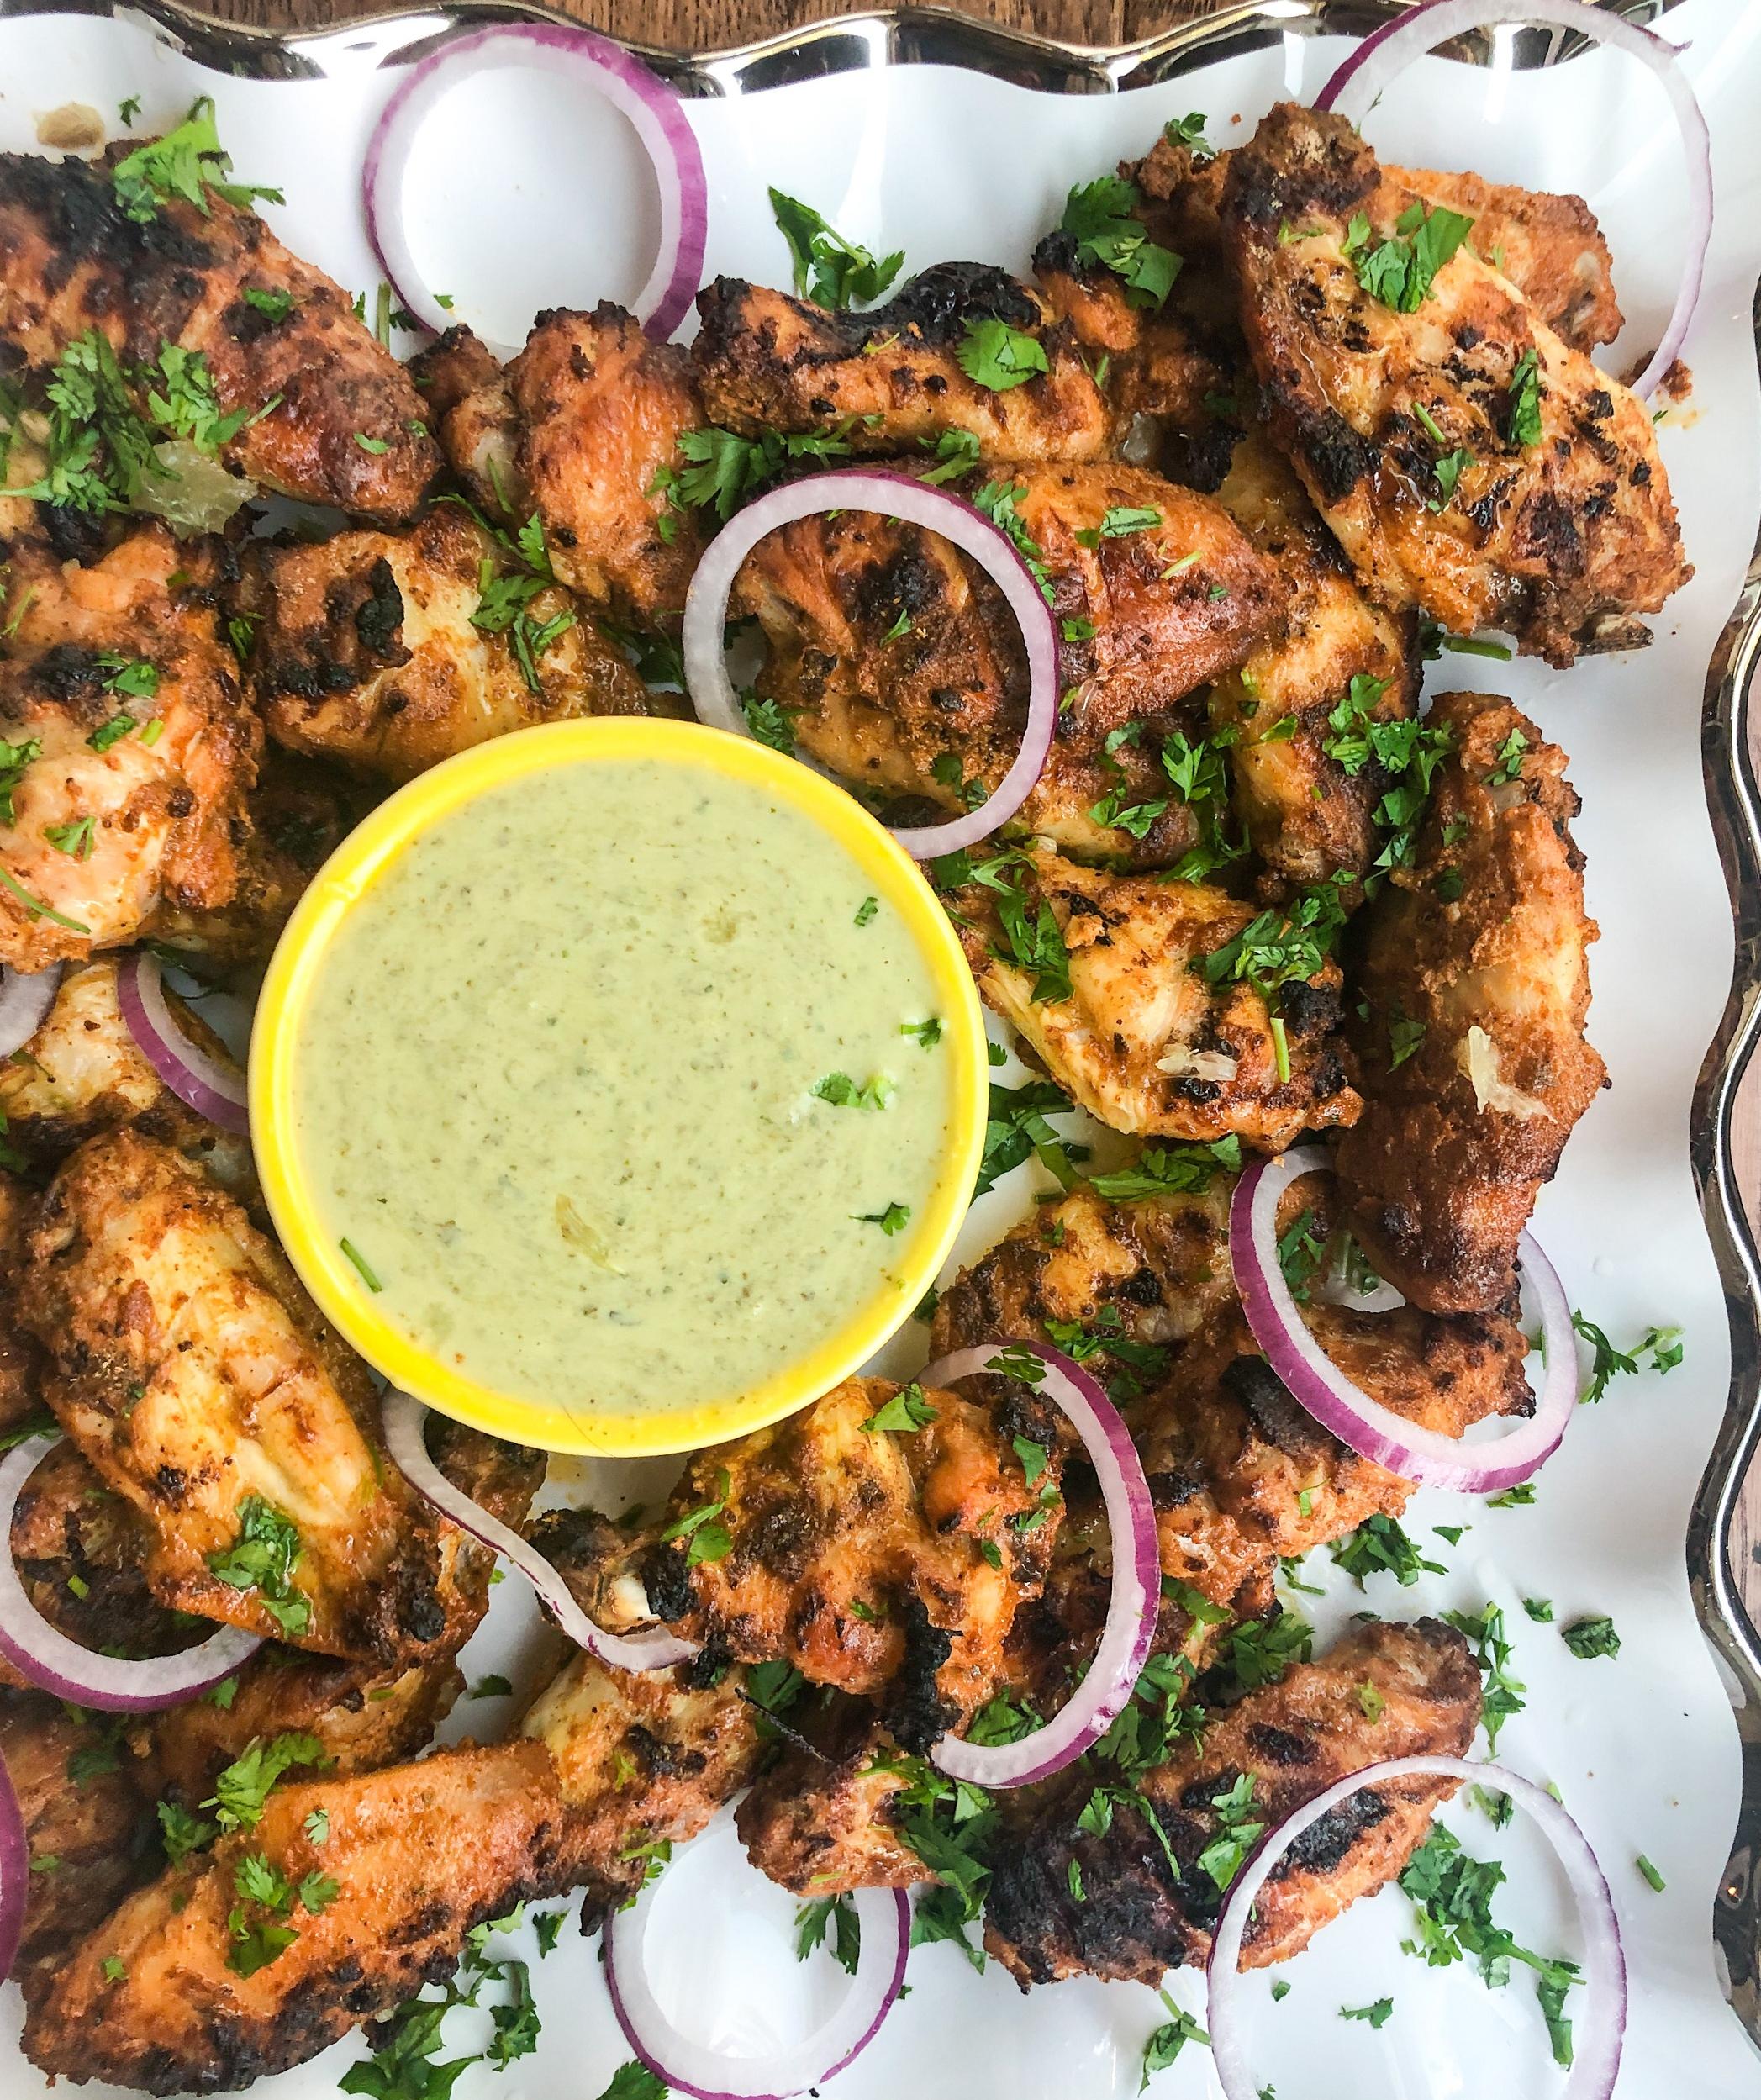  You won't miss the gluten with these crispy chicken tikka wings.